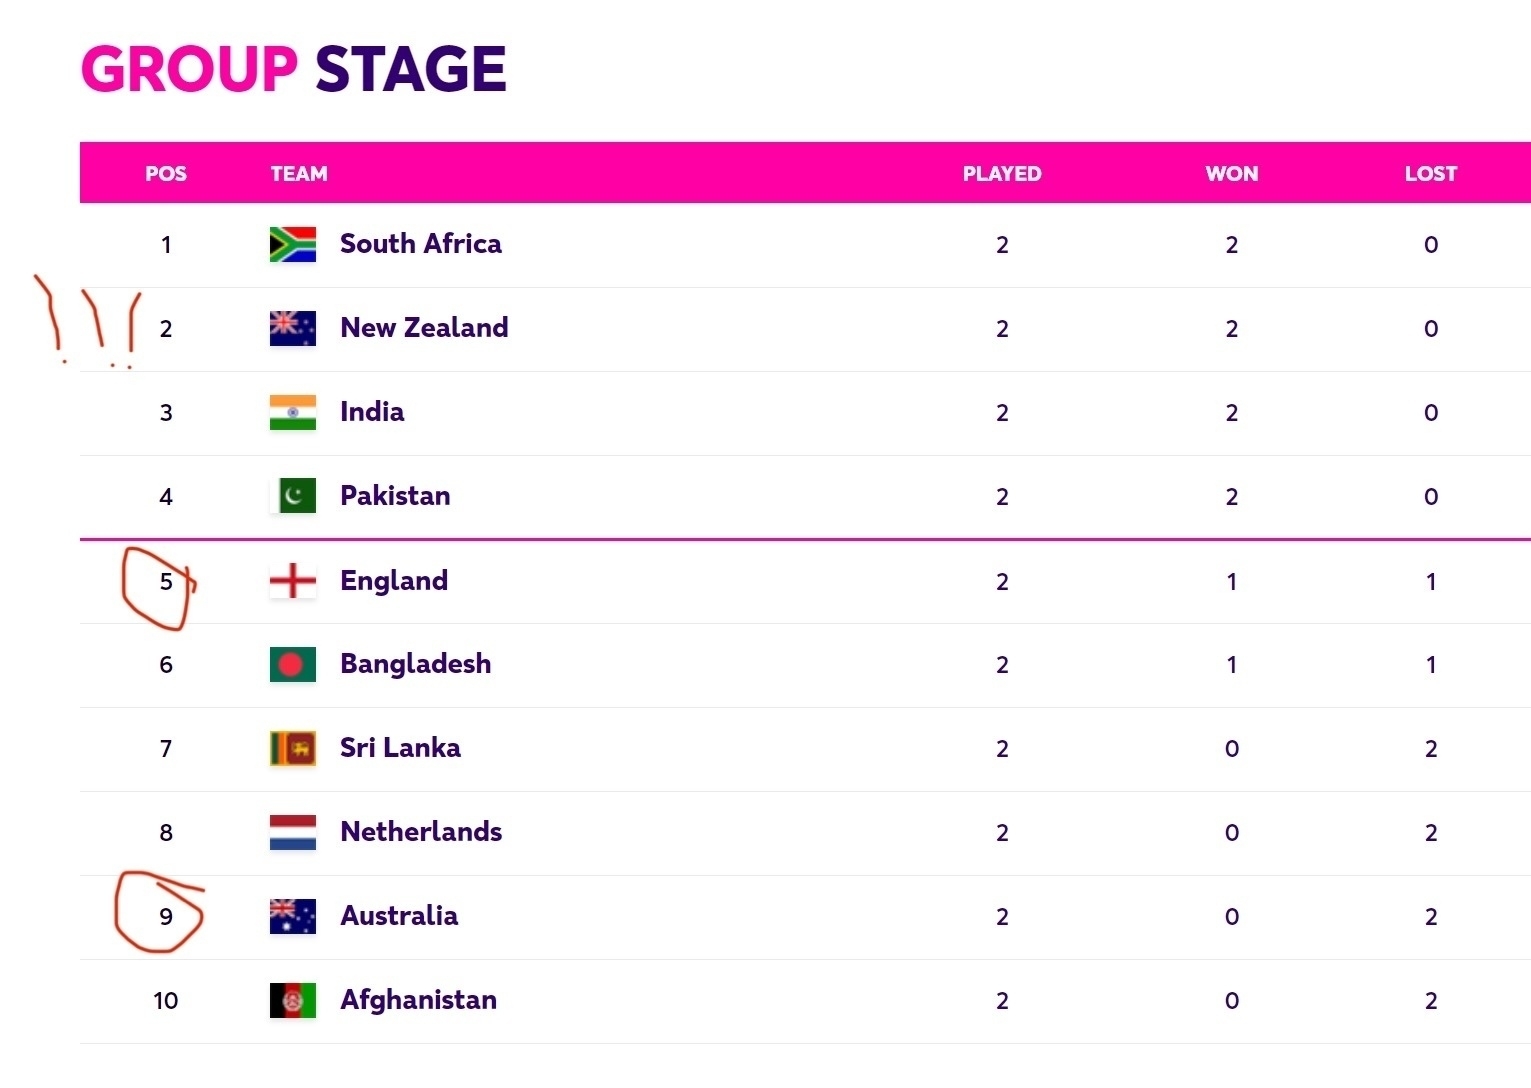 The current standings in the Cricket World Cup group stage after everyone has played two games. England on 2 points after losing through an absolute downtrou to my beloved Black Caps. Australia on zero and near the bottom of the table slightly above Afghanistan by the slightest difference in net run rate, and ranked below The Netherlands. 